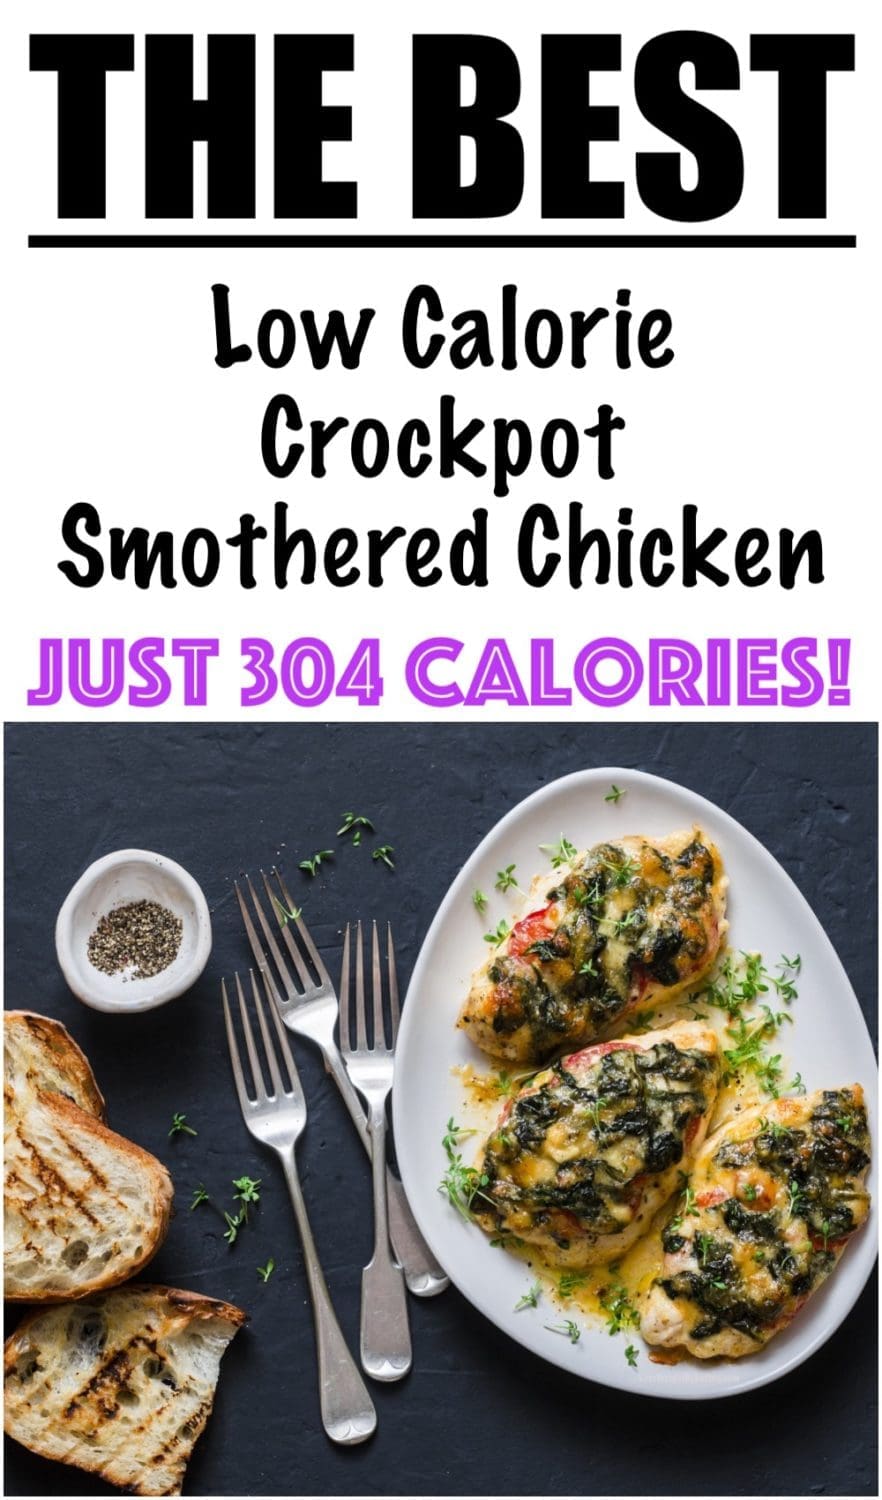 Smothered Chicken in Crockpot